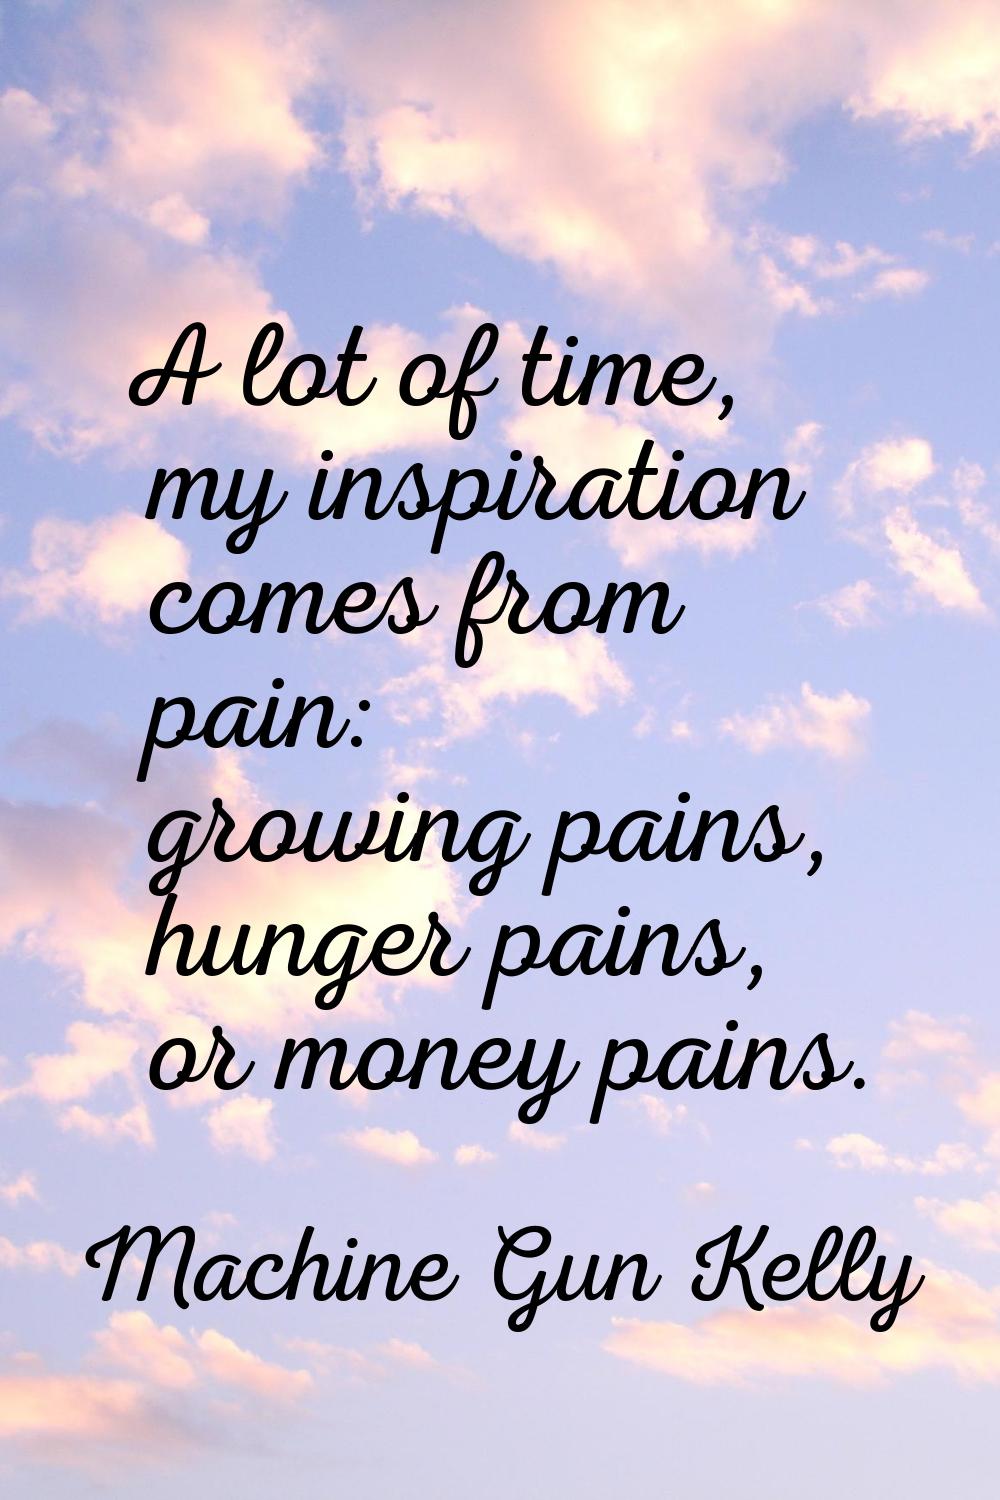 A lot of time, my inspiration comes from pain: growing pains, hunger pains, or money pains.